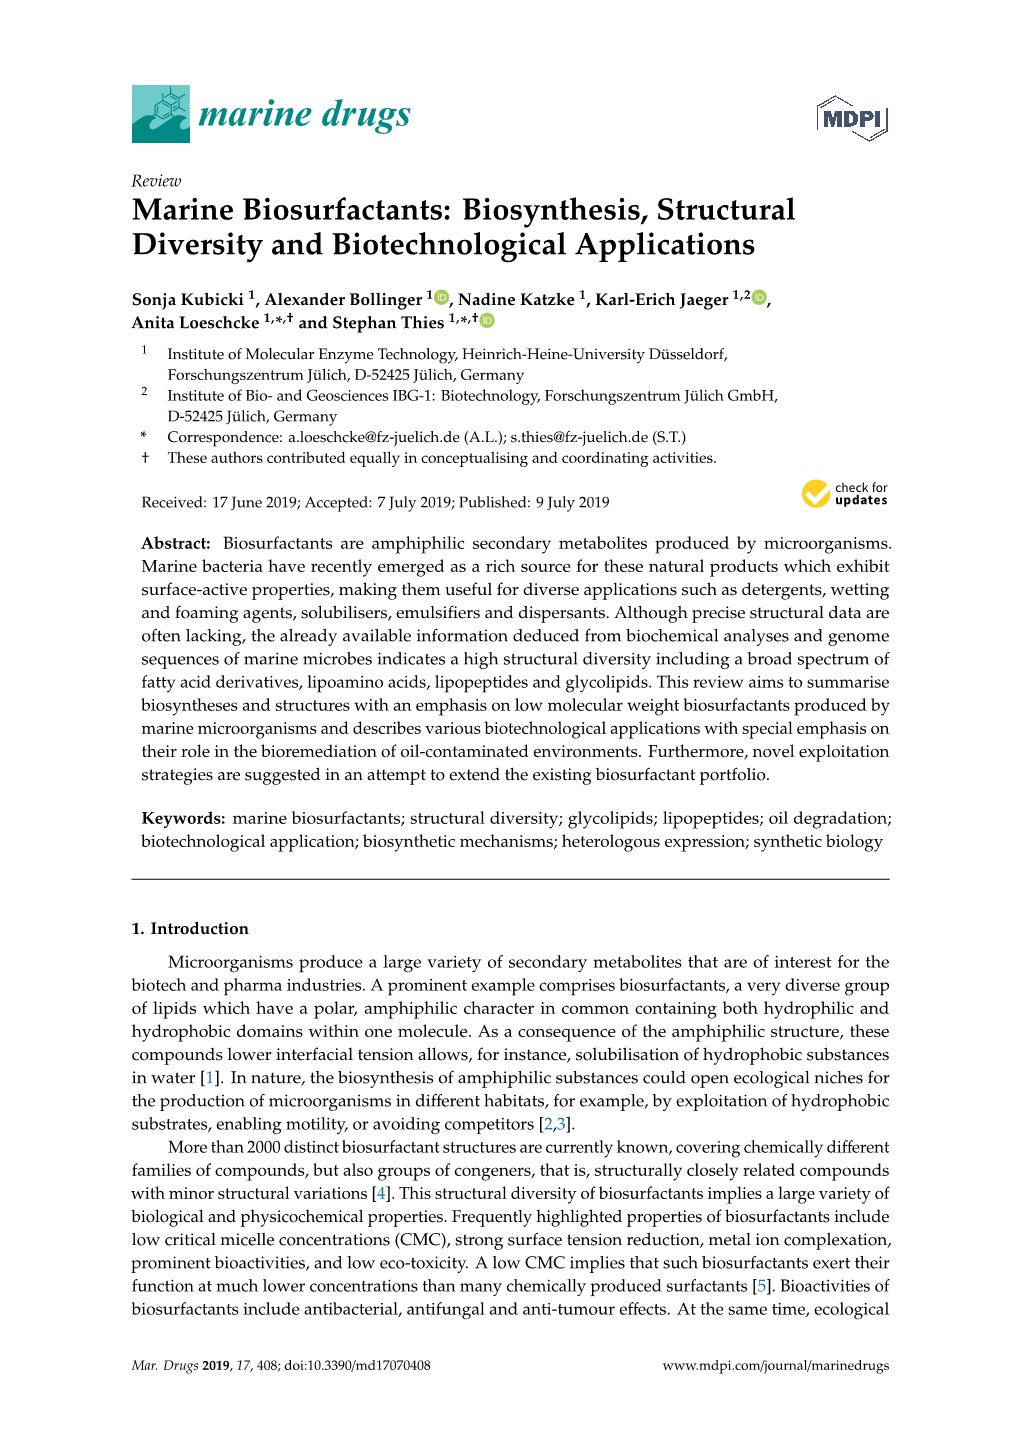 Marine Biosurfactants: Biosynthesis, Structural Diversity and Biotechnological Applications